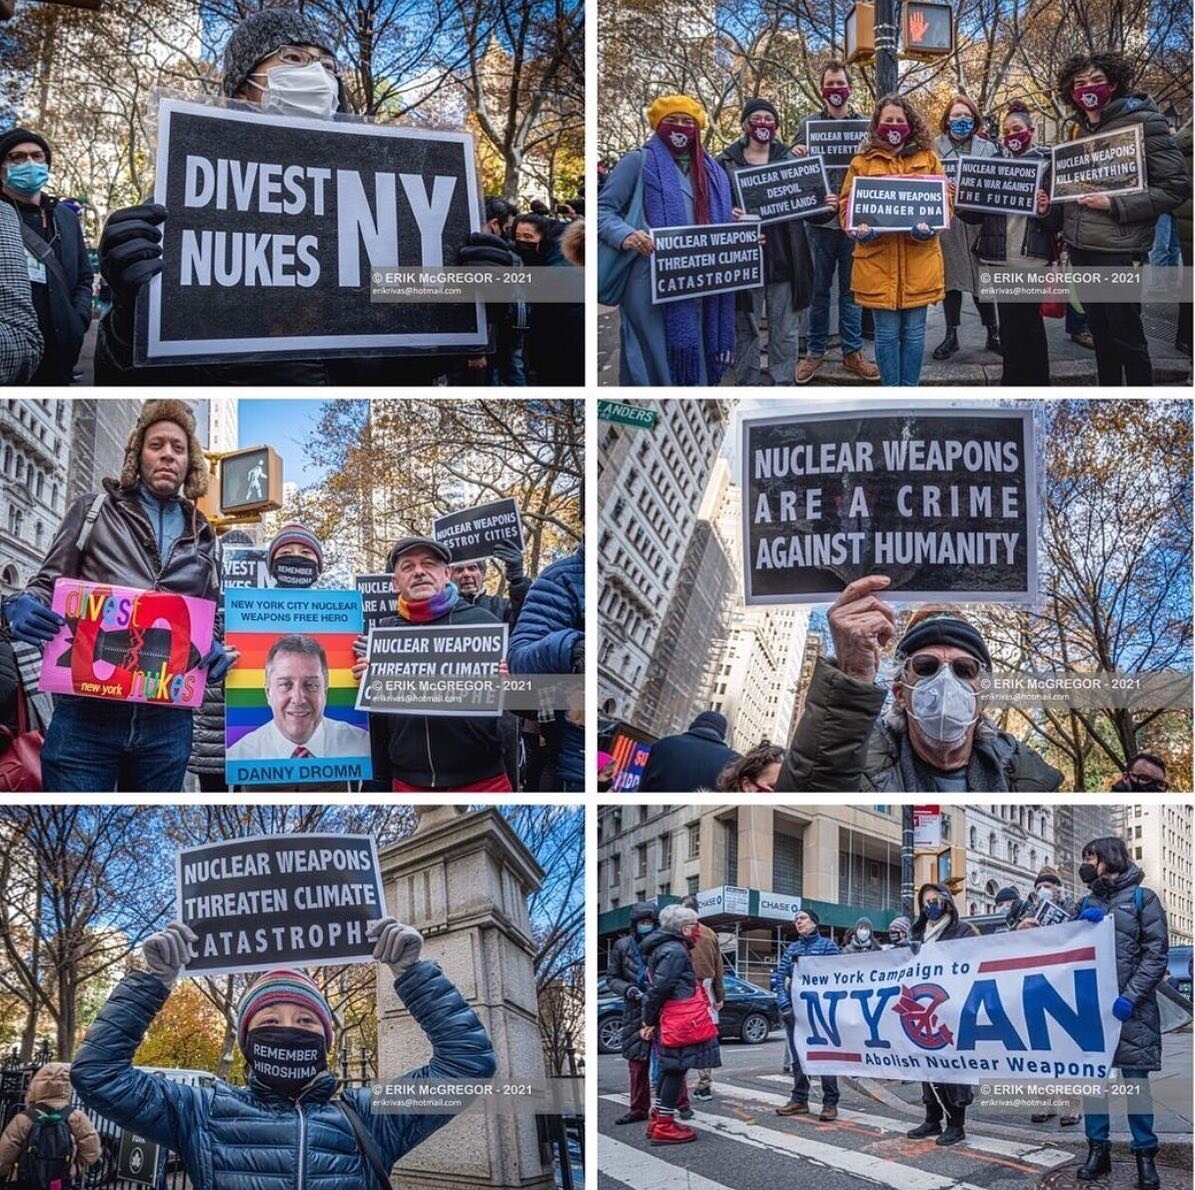 NYCAN and supporters, including @risenresistnyc, gathered in NYC at City Hall on 11/23/21 for the final push to pass Res. 976-2019 and INT 1621-2019, introduced by City Council Member Daniel Dromm.

#NuclearBan #NuclearBanTreaty #DivestNukesNYC #Abol